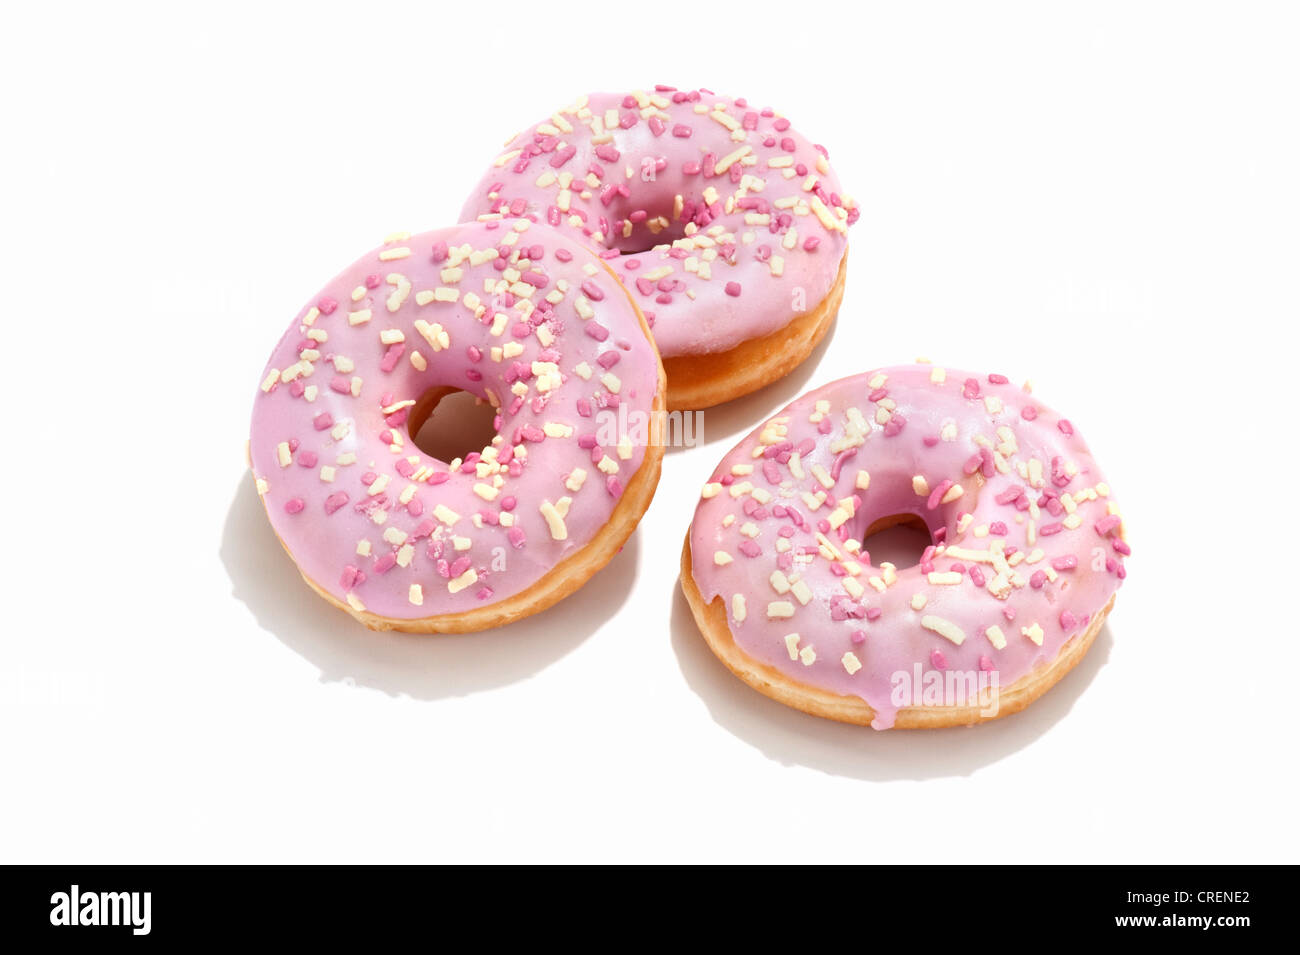 Three ring doughnuts with pink icing Stock Photo